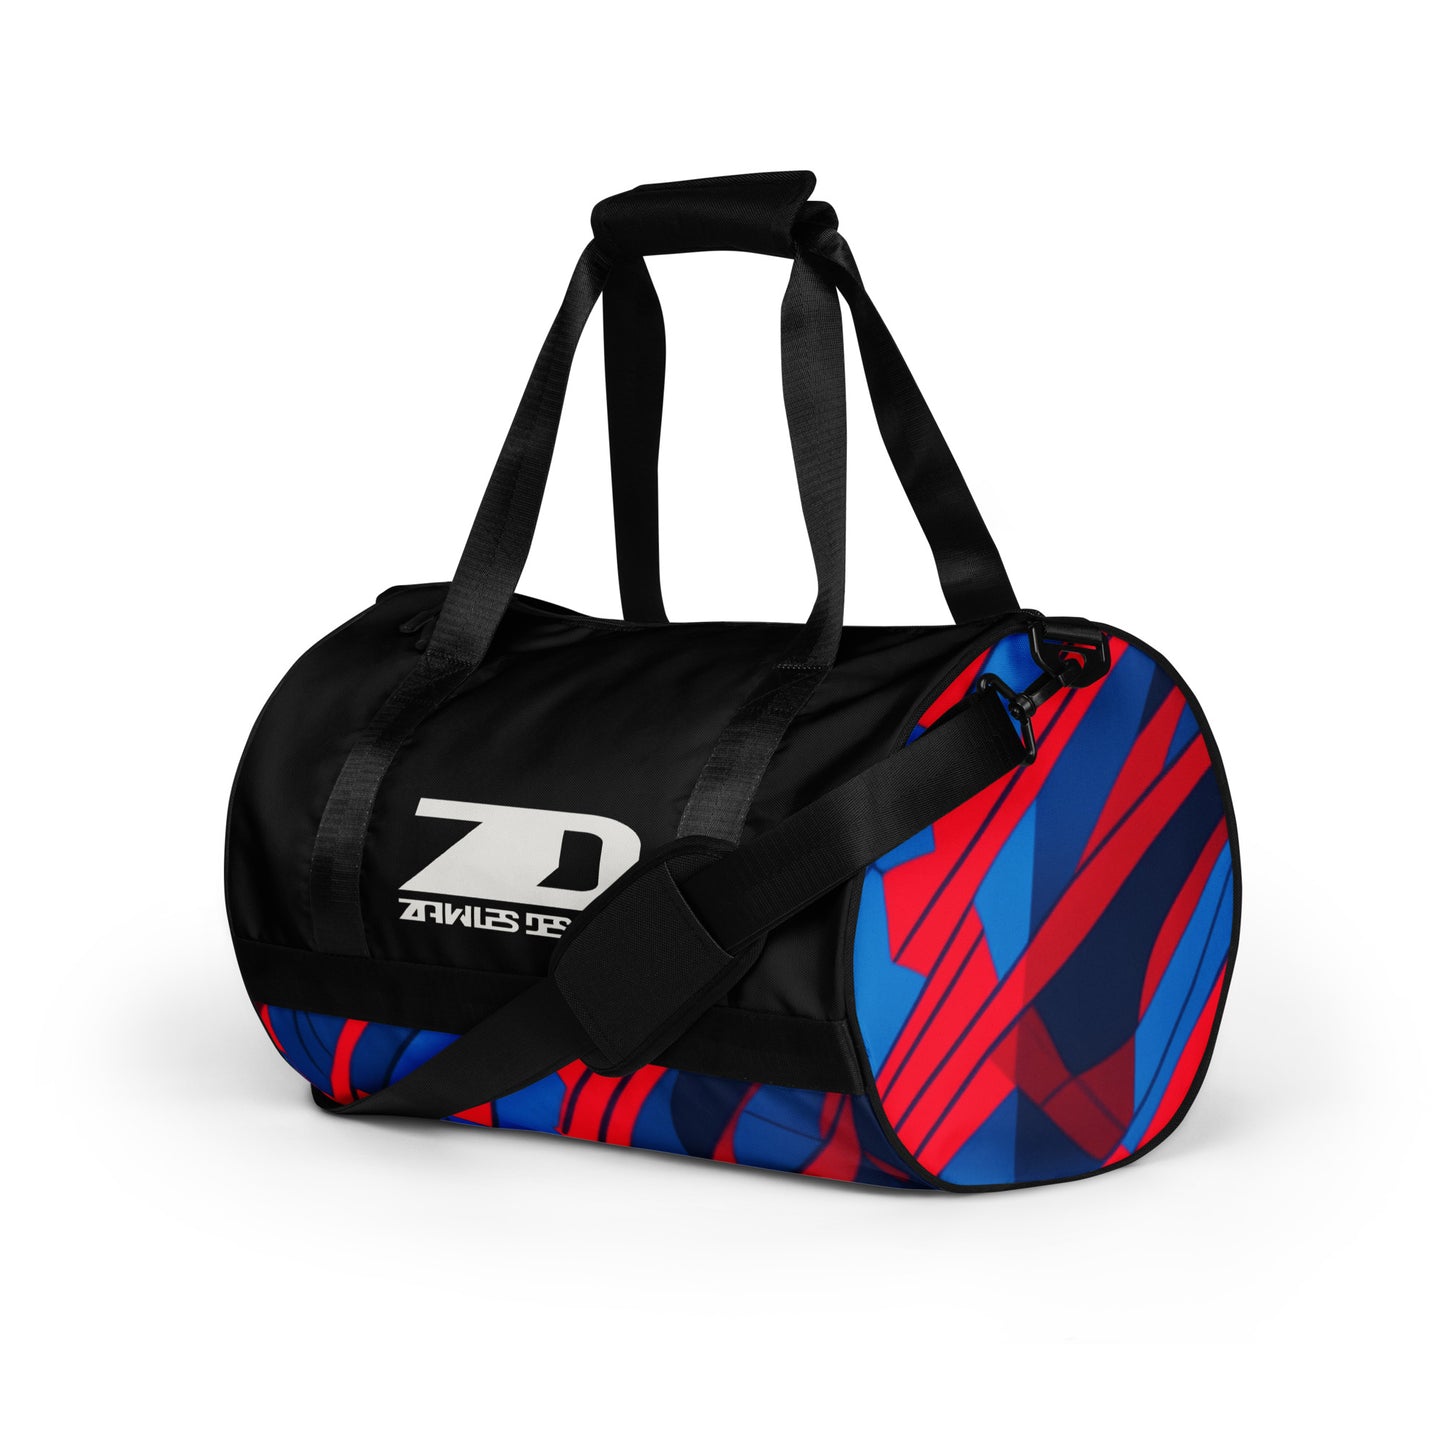 Water-resistant Gym Bag by Zawles Designs